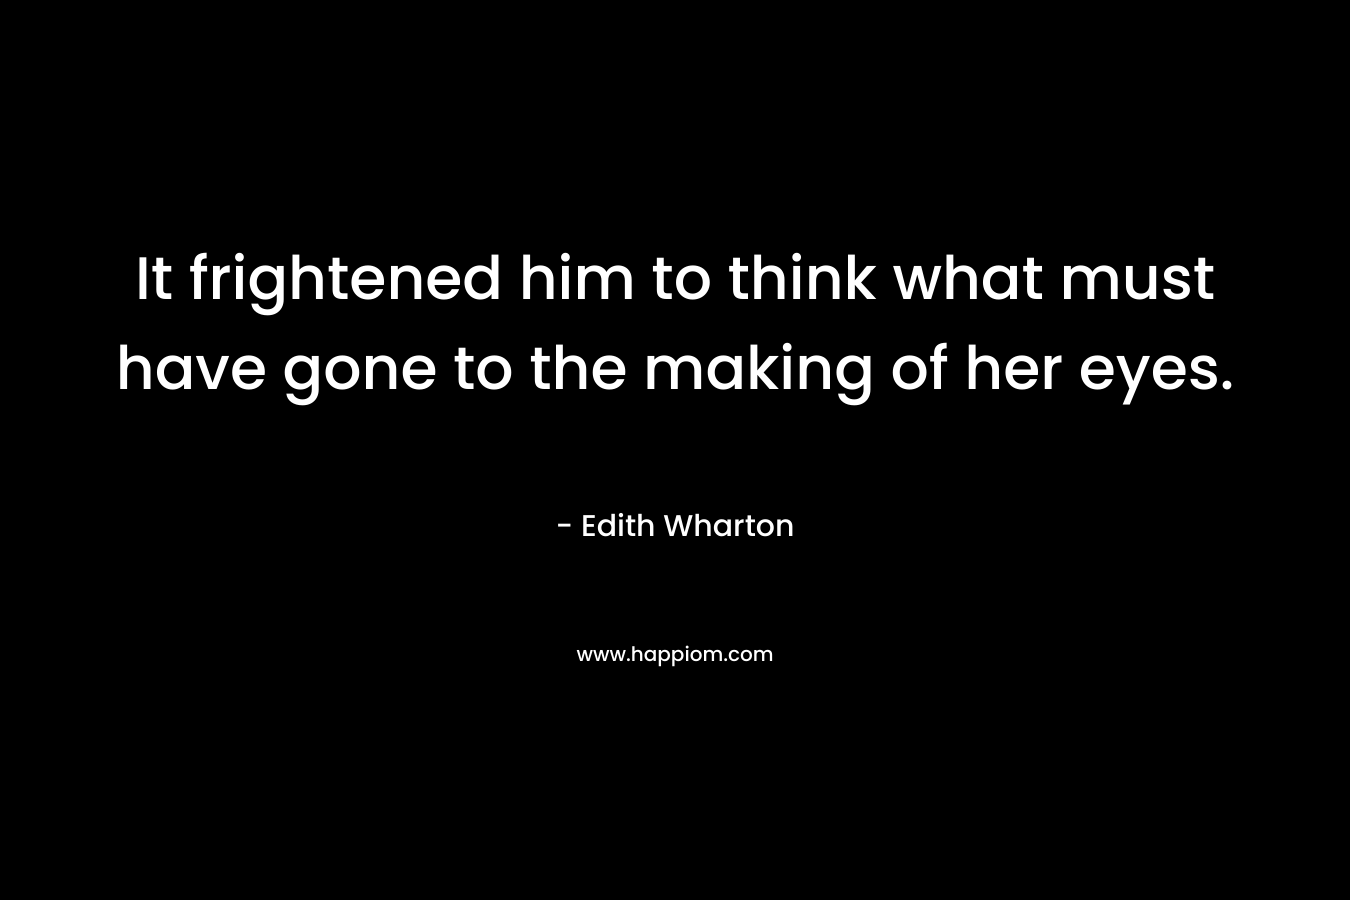 It frightened him to think what must have gone to the making of her eyes. – Edith Wharton